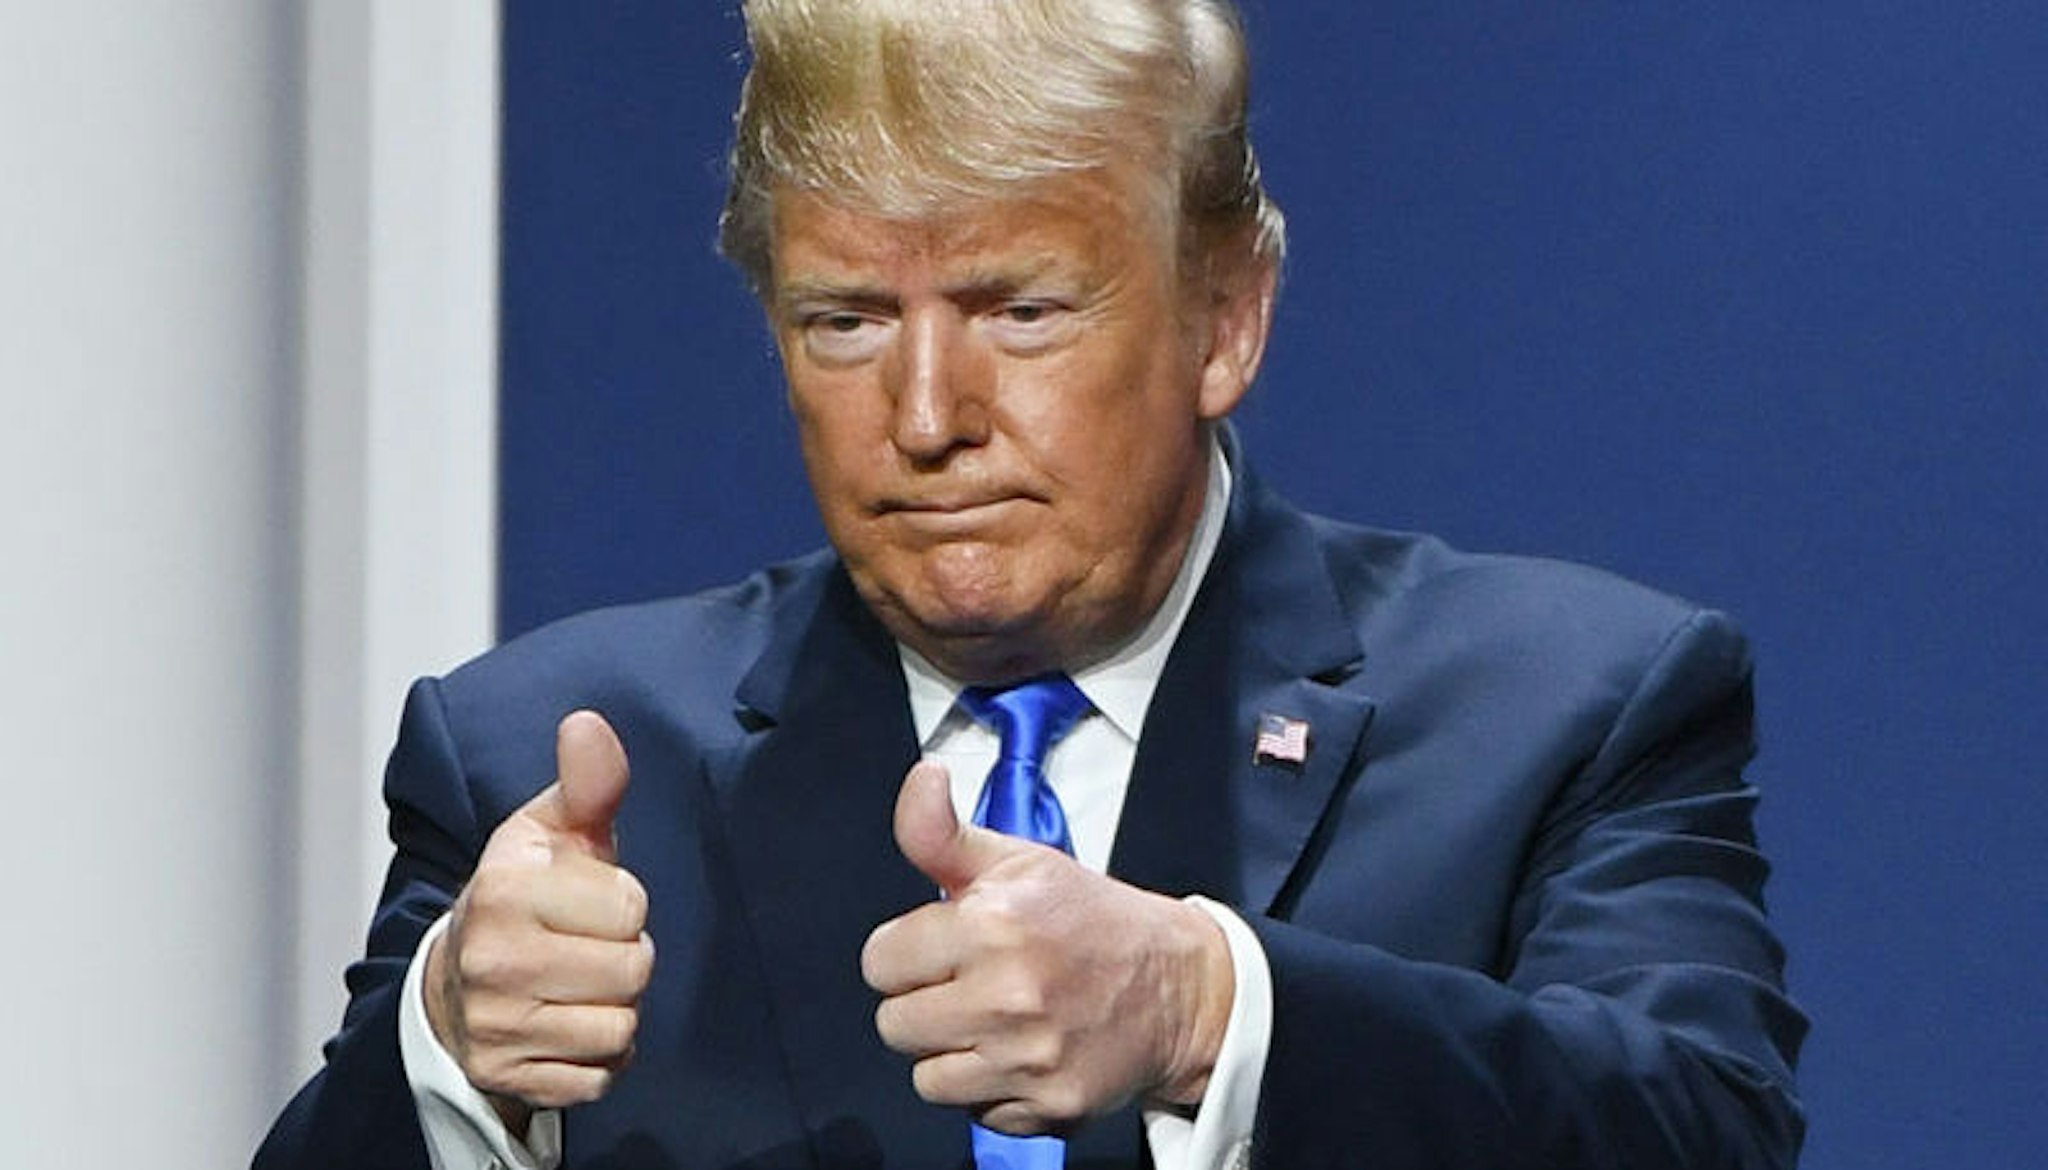 U.S. President Donald Trump gestures after speaking during the Republican Jewish Coalition's annual leadership meeting at The Venetian Las Vegas on April 6, 2019 in Las Vegas, Nevada. Trump has cited his moving of the U.S. embassy in Israel to Jerusalem and his decision to pull the U.S. out of the Iran nuclear deal as reasons for Jewish voters to leave the Democratic party and support him and the GOP instead. (Photo by Ethan Miller/Getty Images)